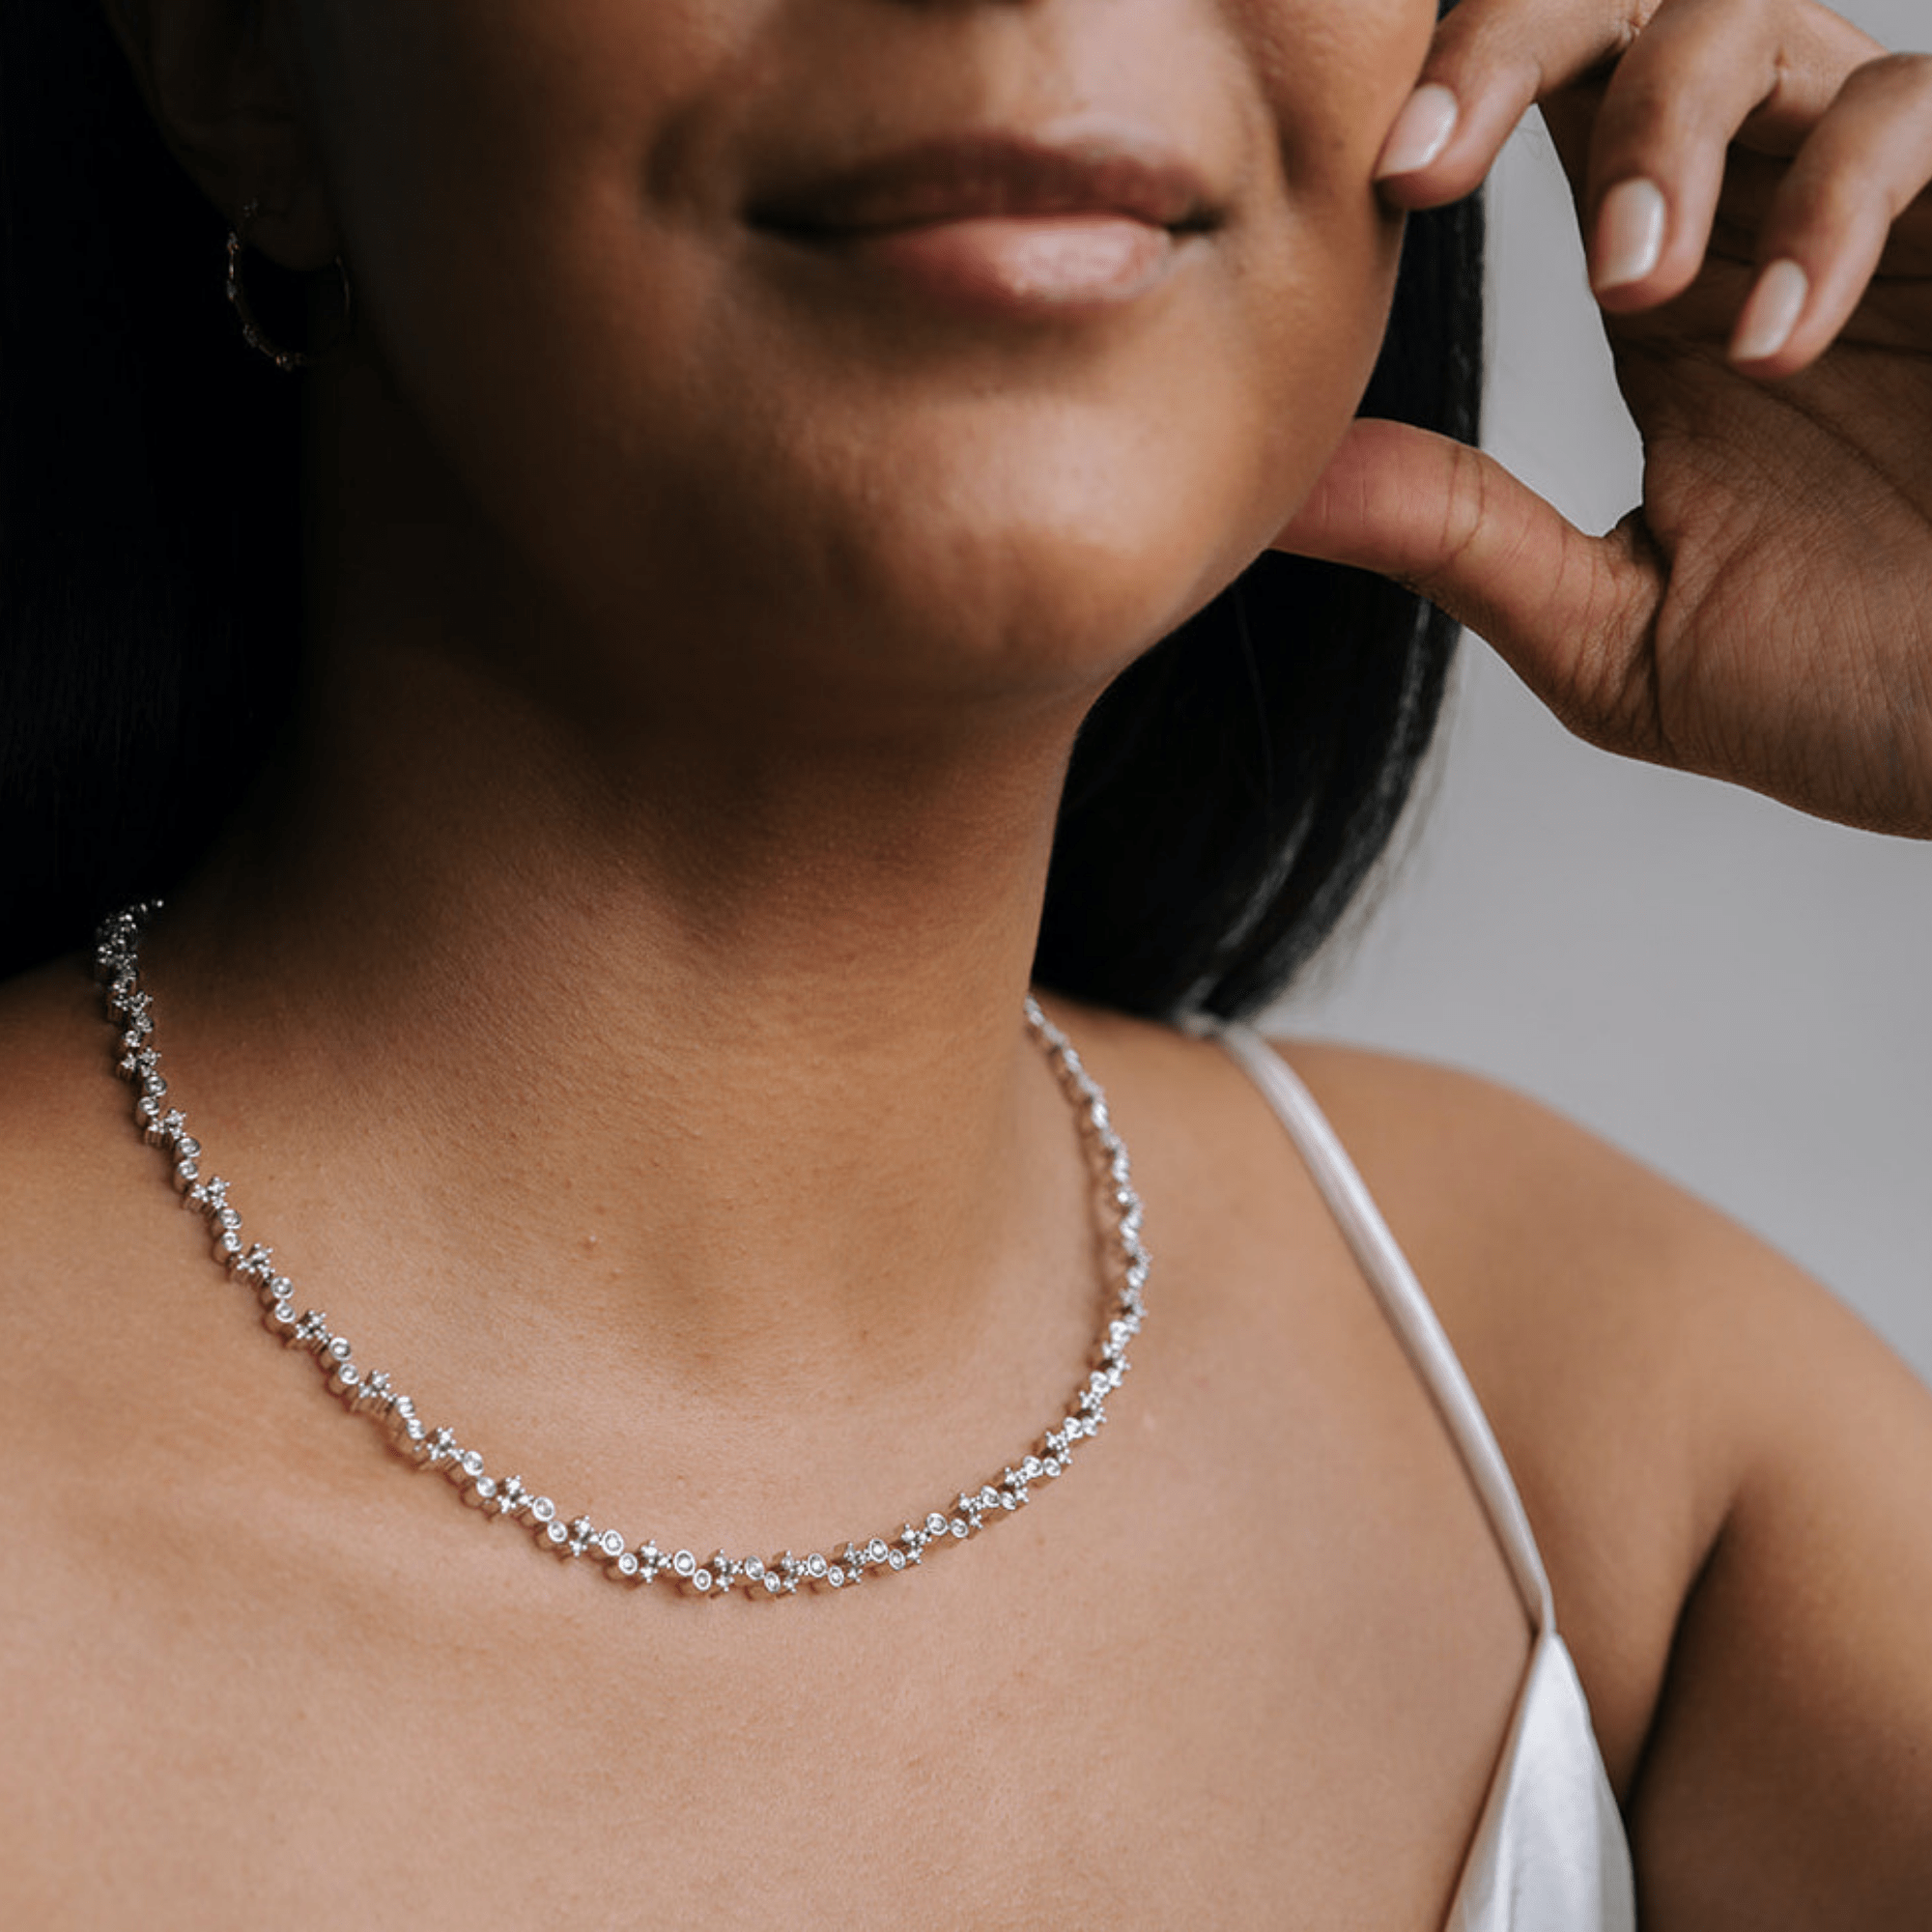 Types Of Necklaces | Candeo Diamonds Blog